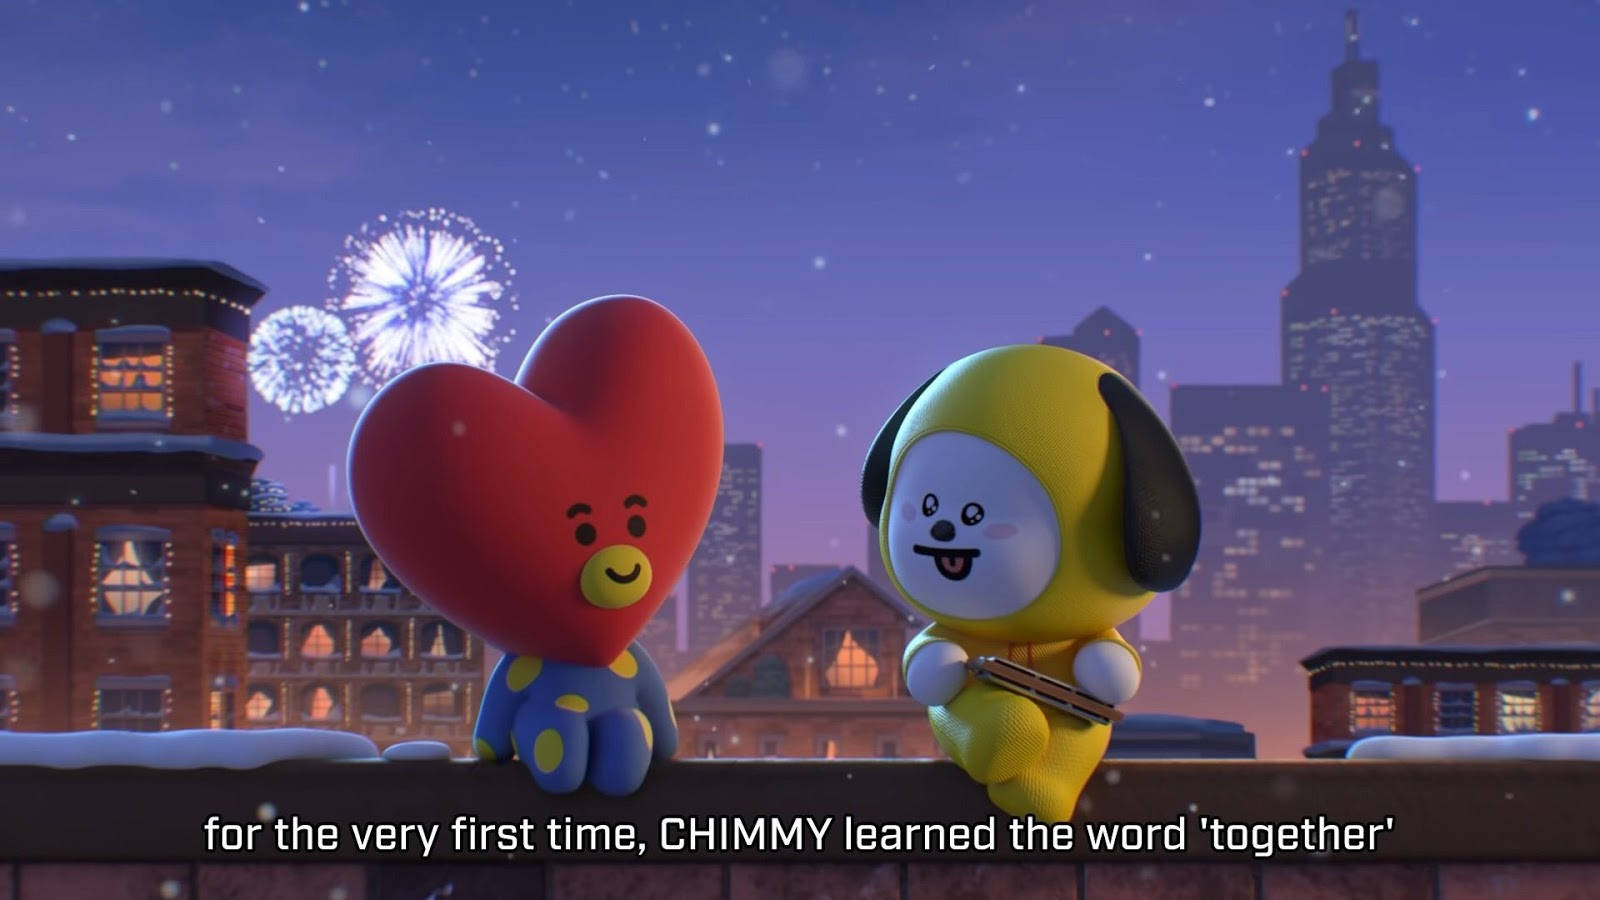 Tata And Chimmy Bt21 Background